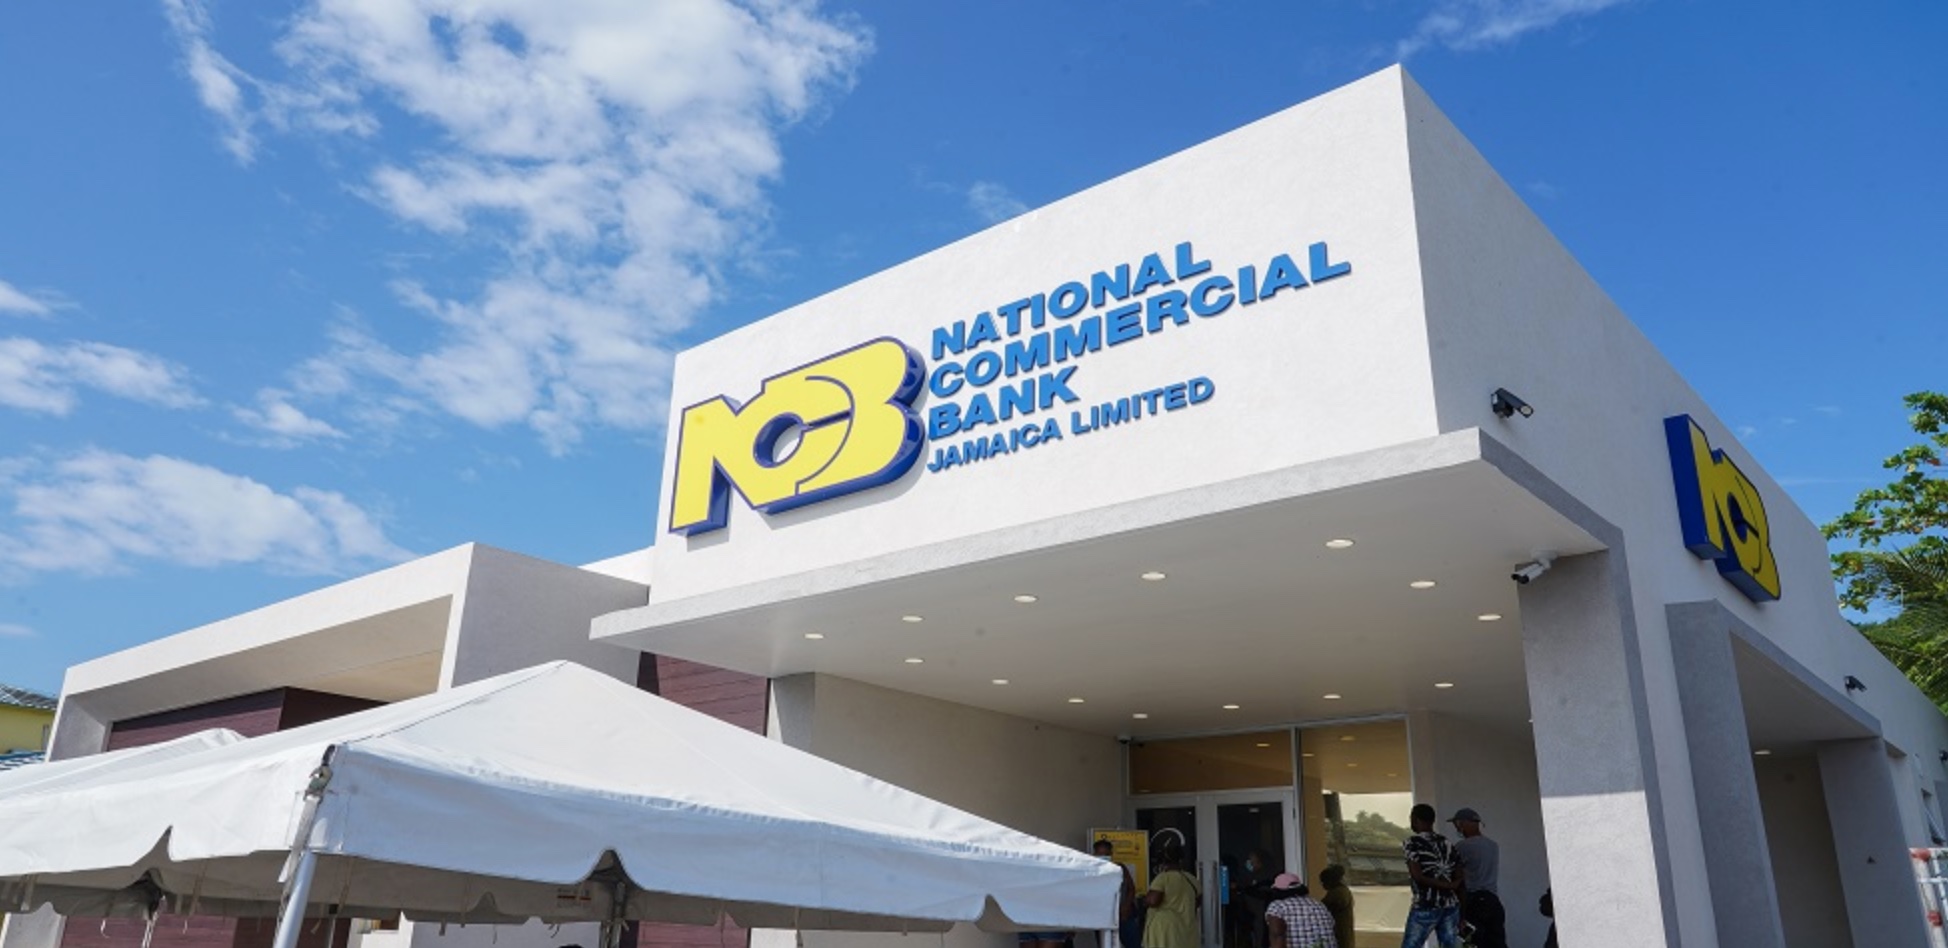 Woman Scammed $1.7 Million from NCB Account - Watch Report